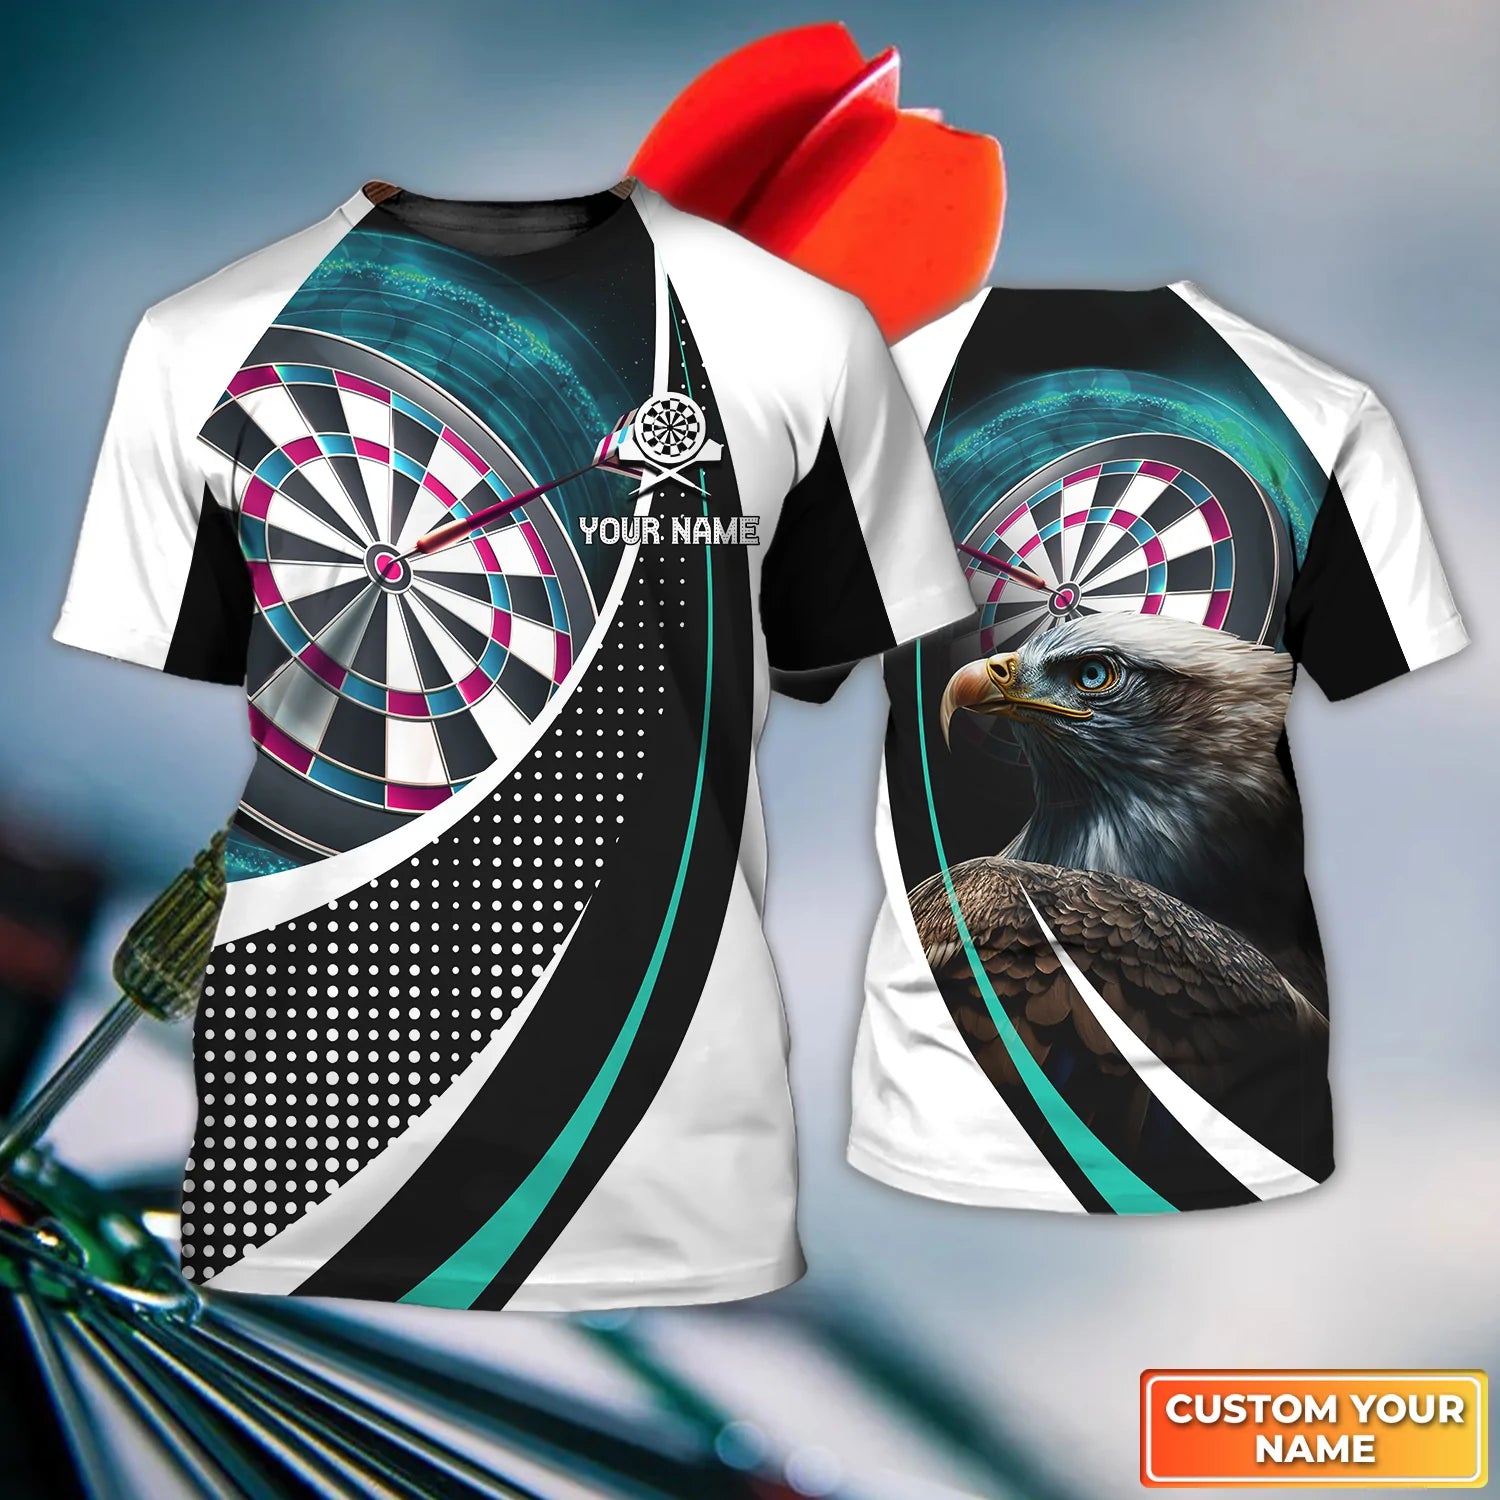 bullseye dartboard personalized name 3d eagle and darts tshirt for dart team player tad dt007 di4mu